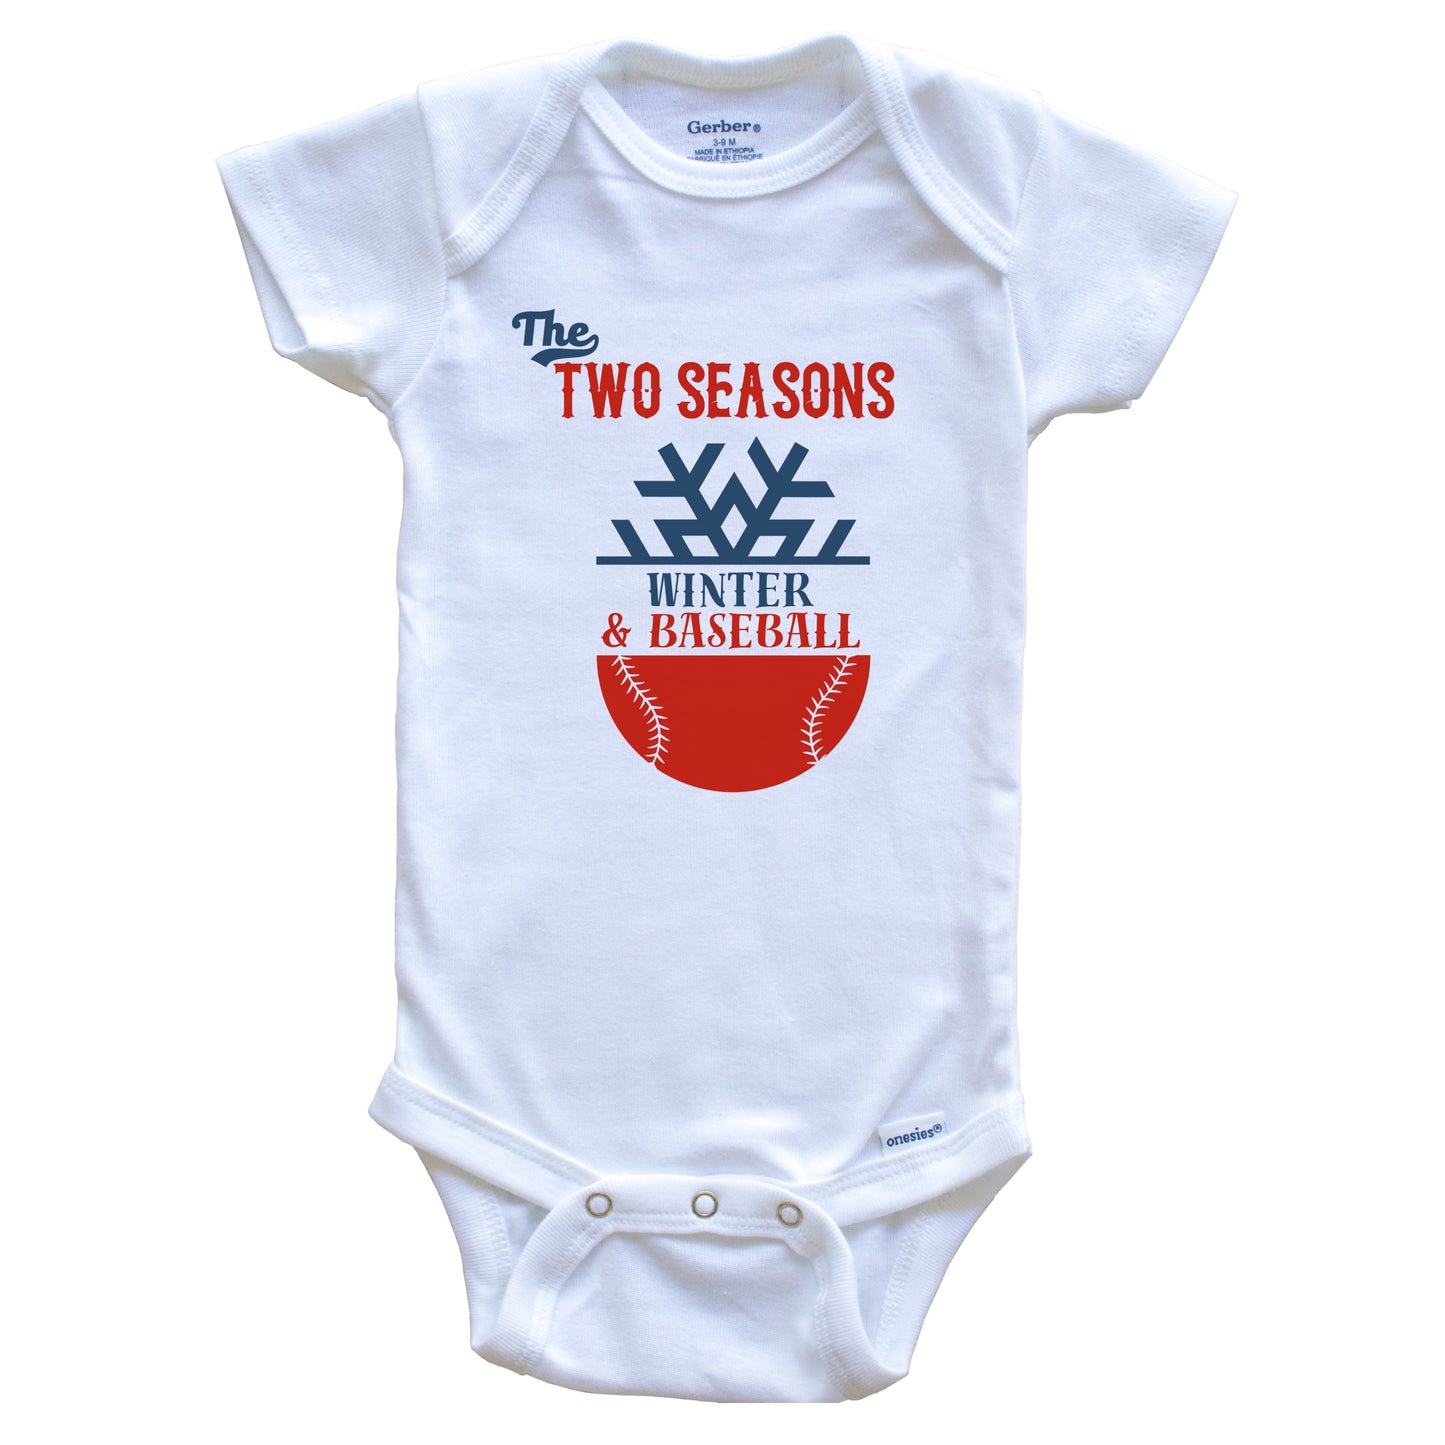 The Two Seasons Winter and Baseball Funny Cute Baby Onesie - Baby Bodysuit